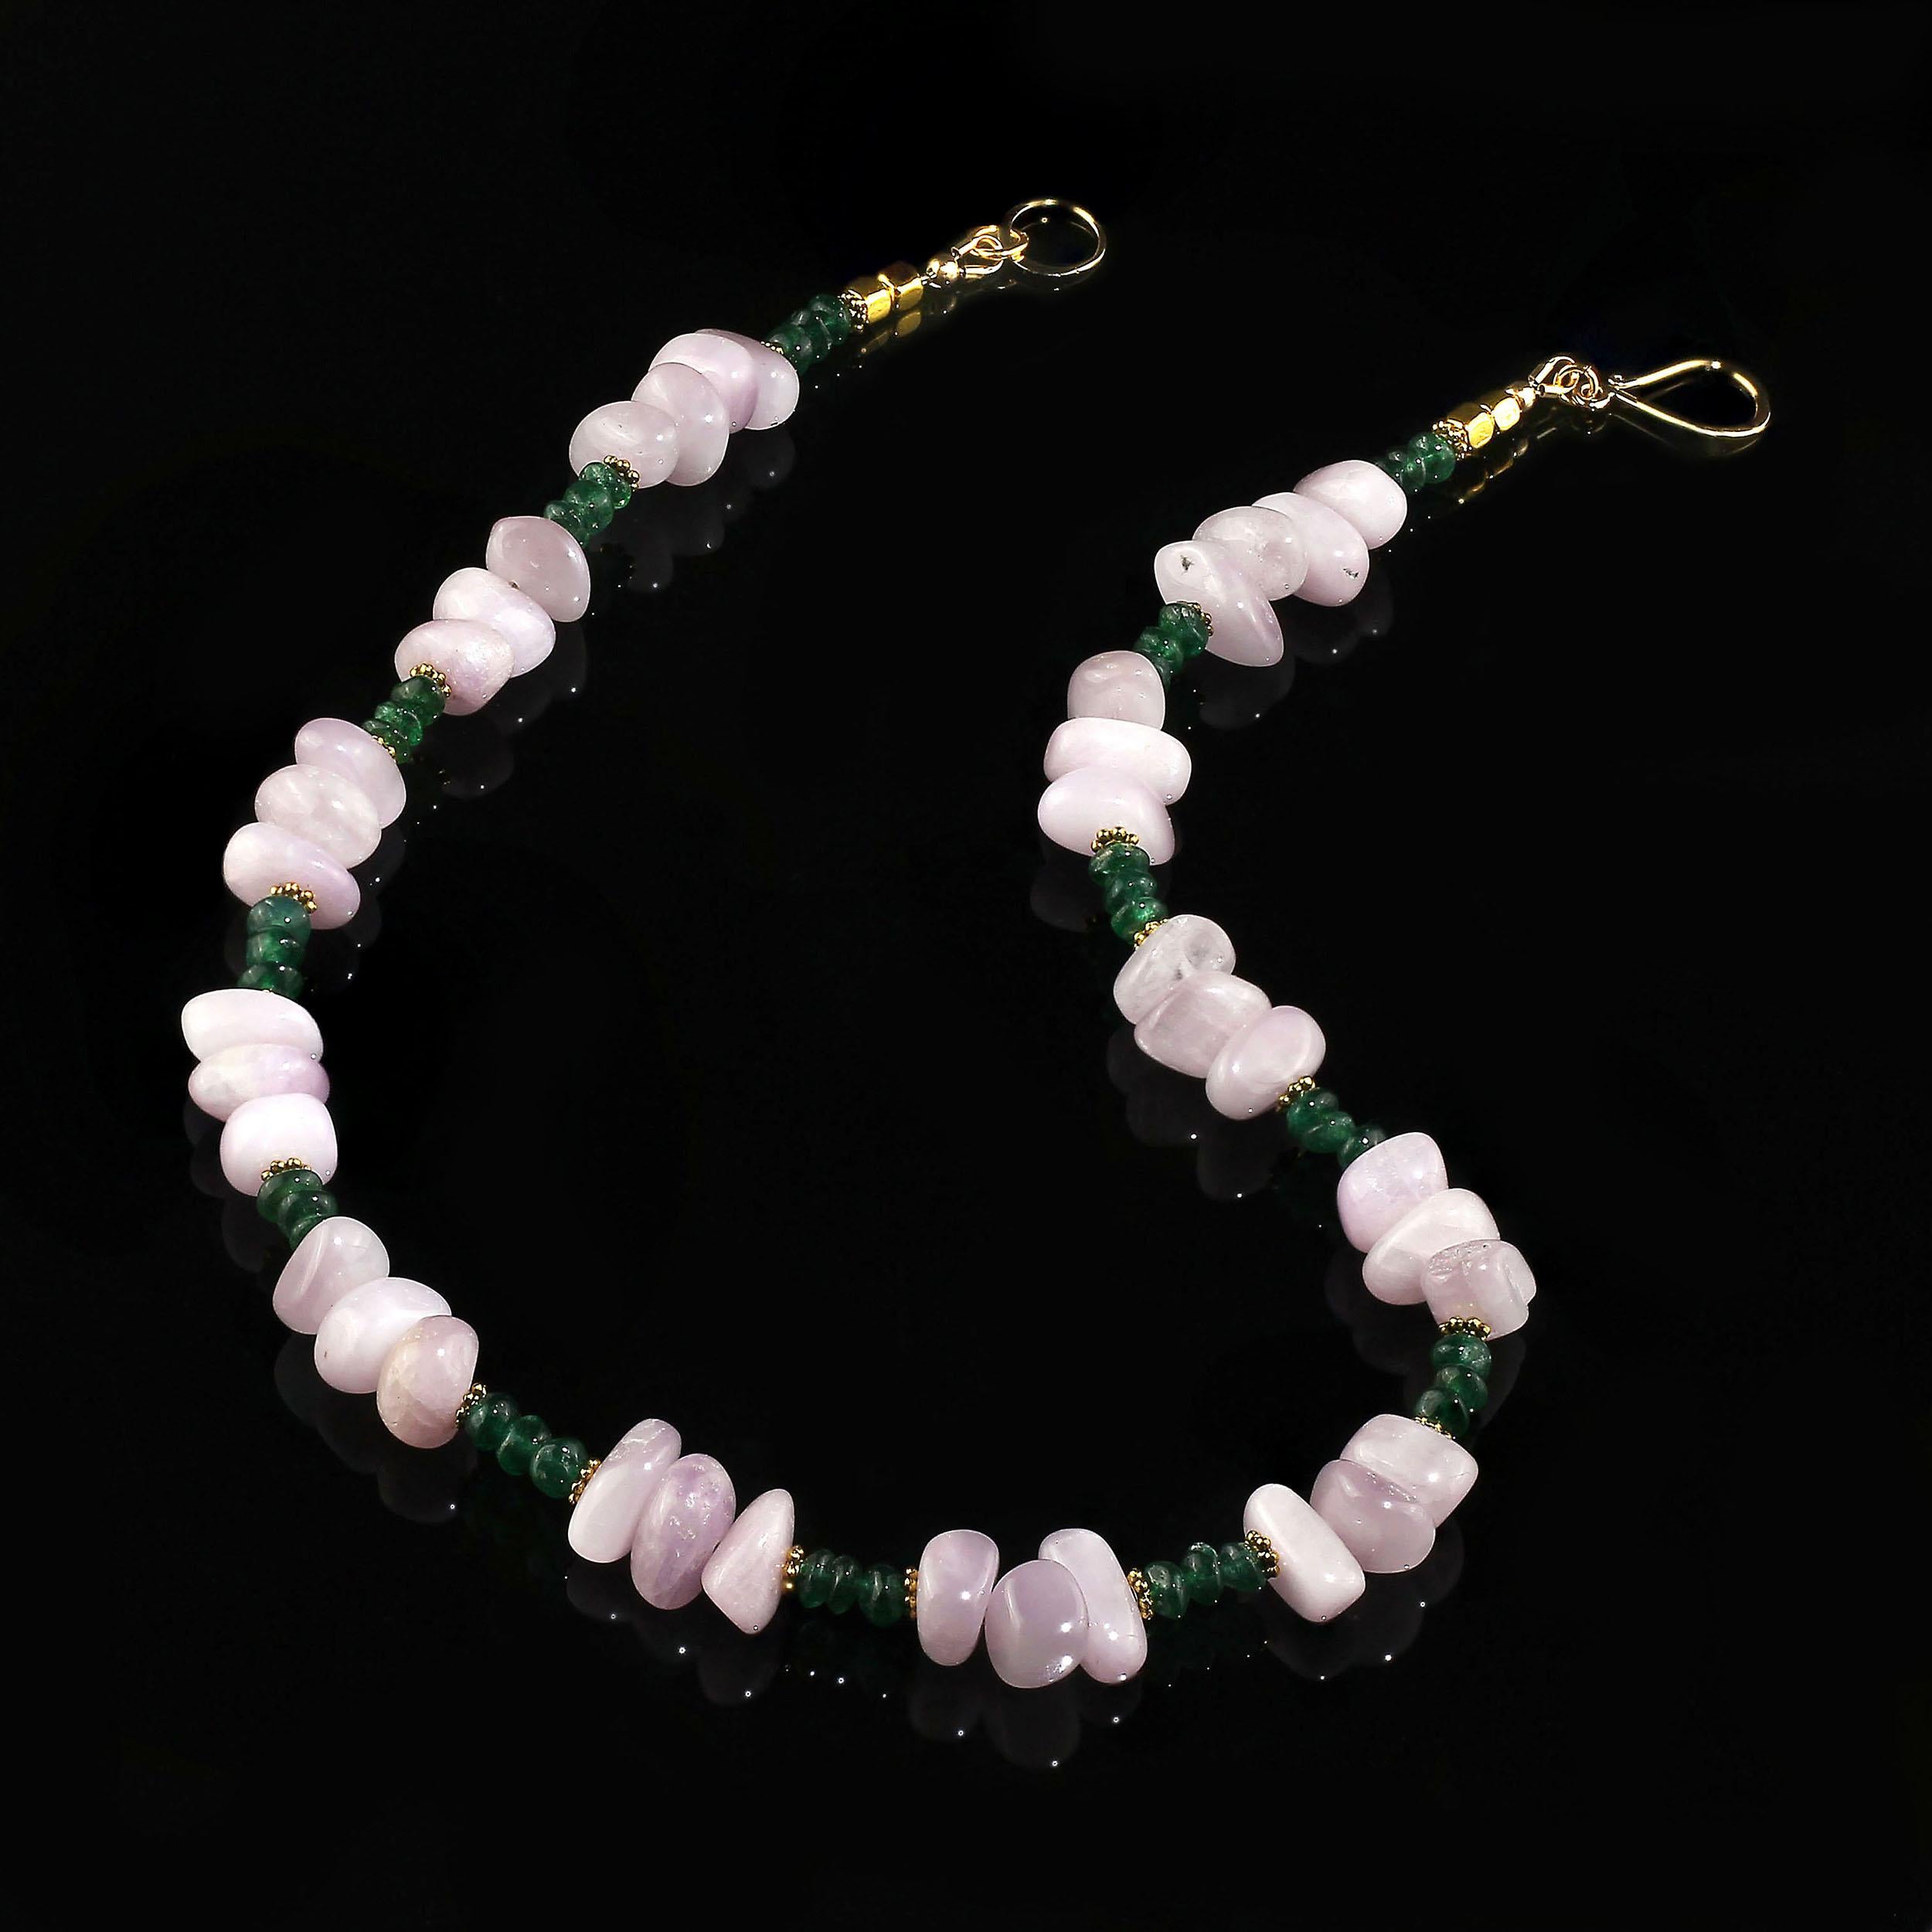 AJD Glowing Kunzite and Aventurine Necklace for Summer Fun For Sale 2